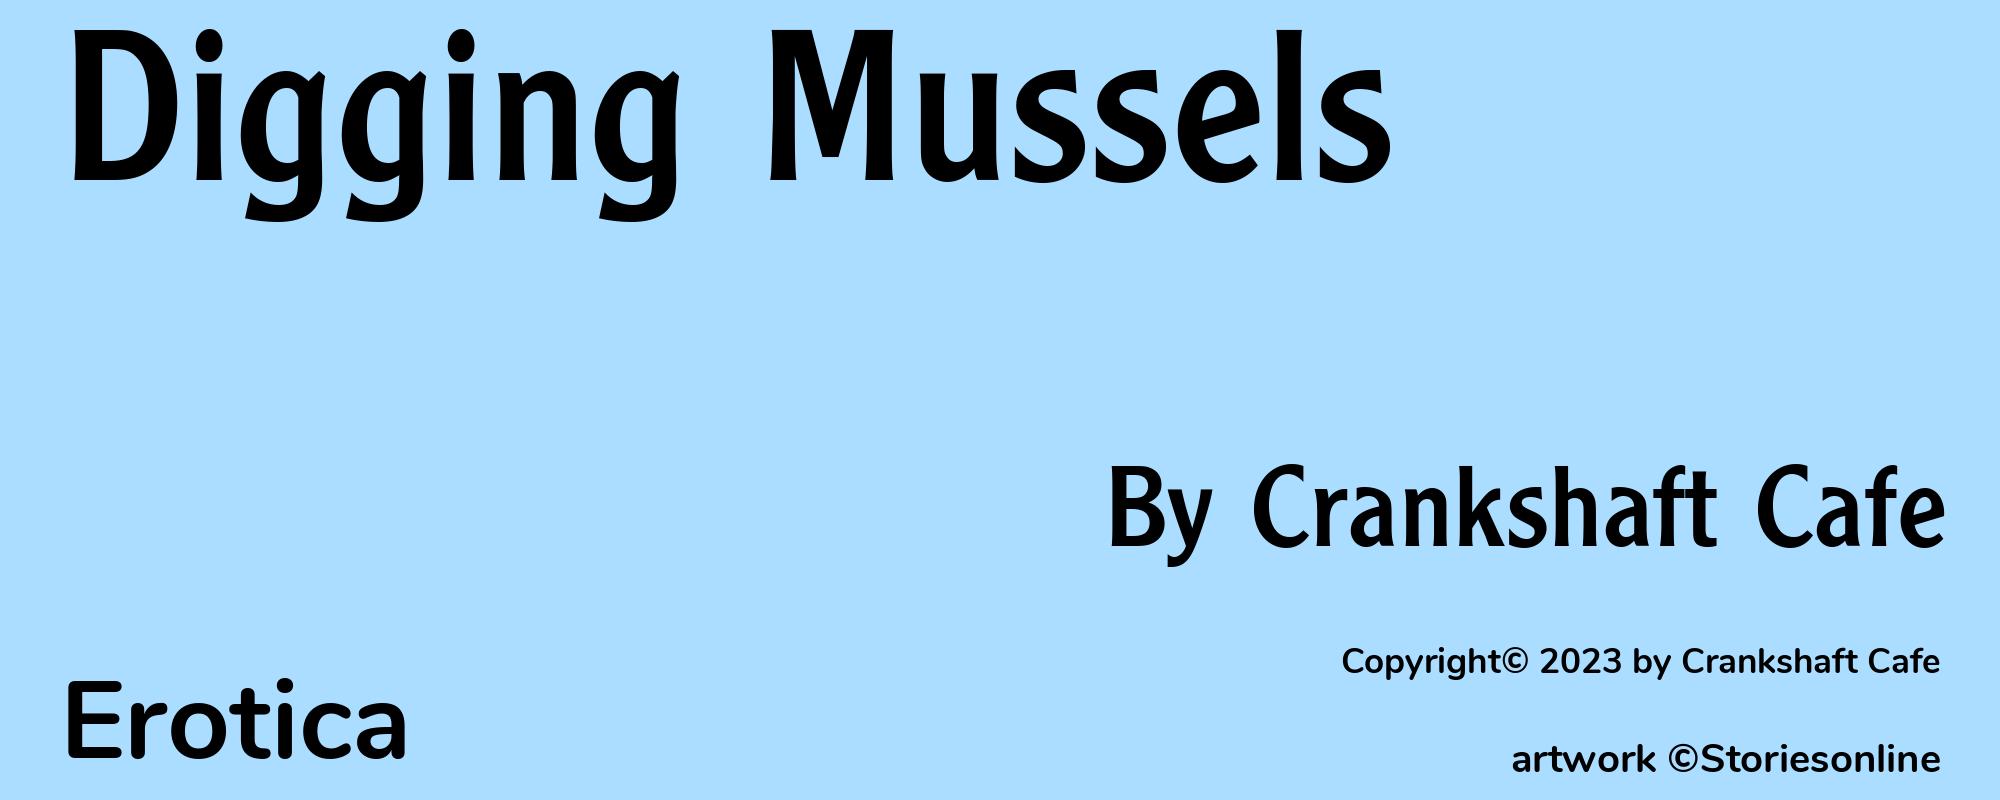 Digging Mussels - Cover